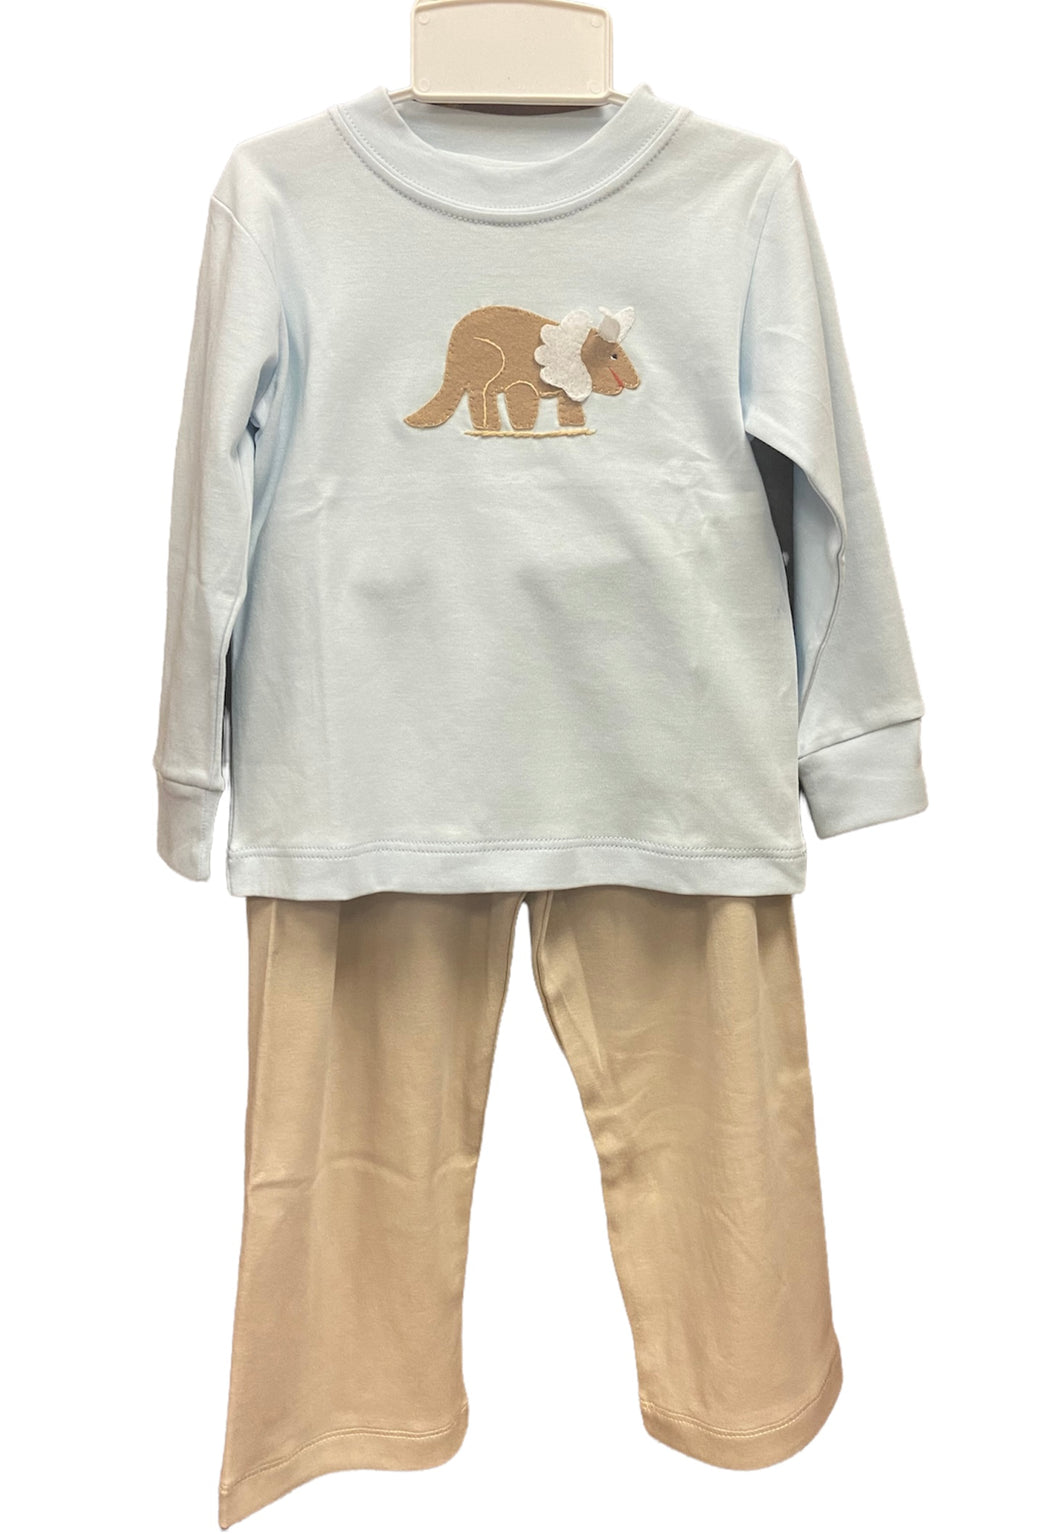 Light Blue & Tan Dino Pant Set by Squiggles